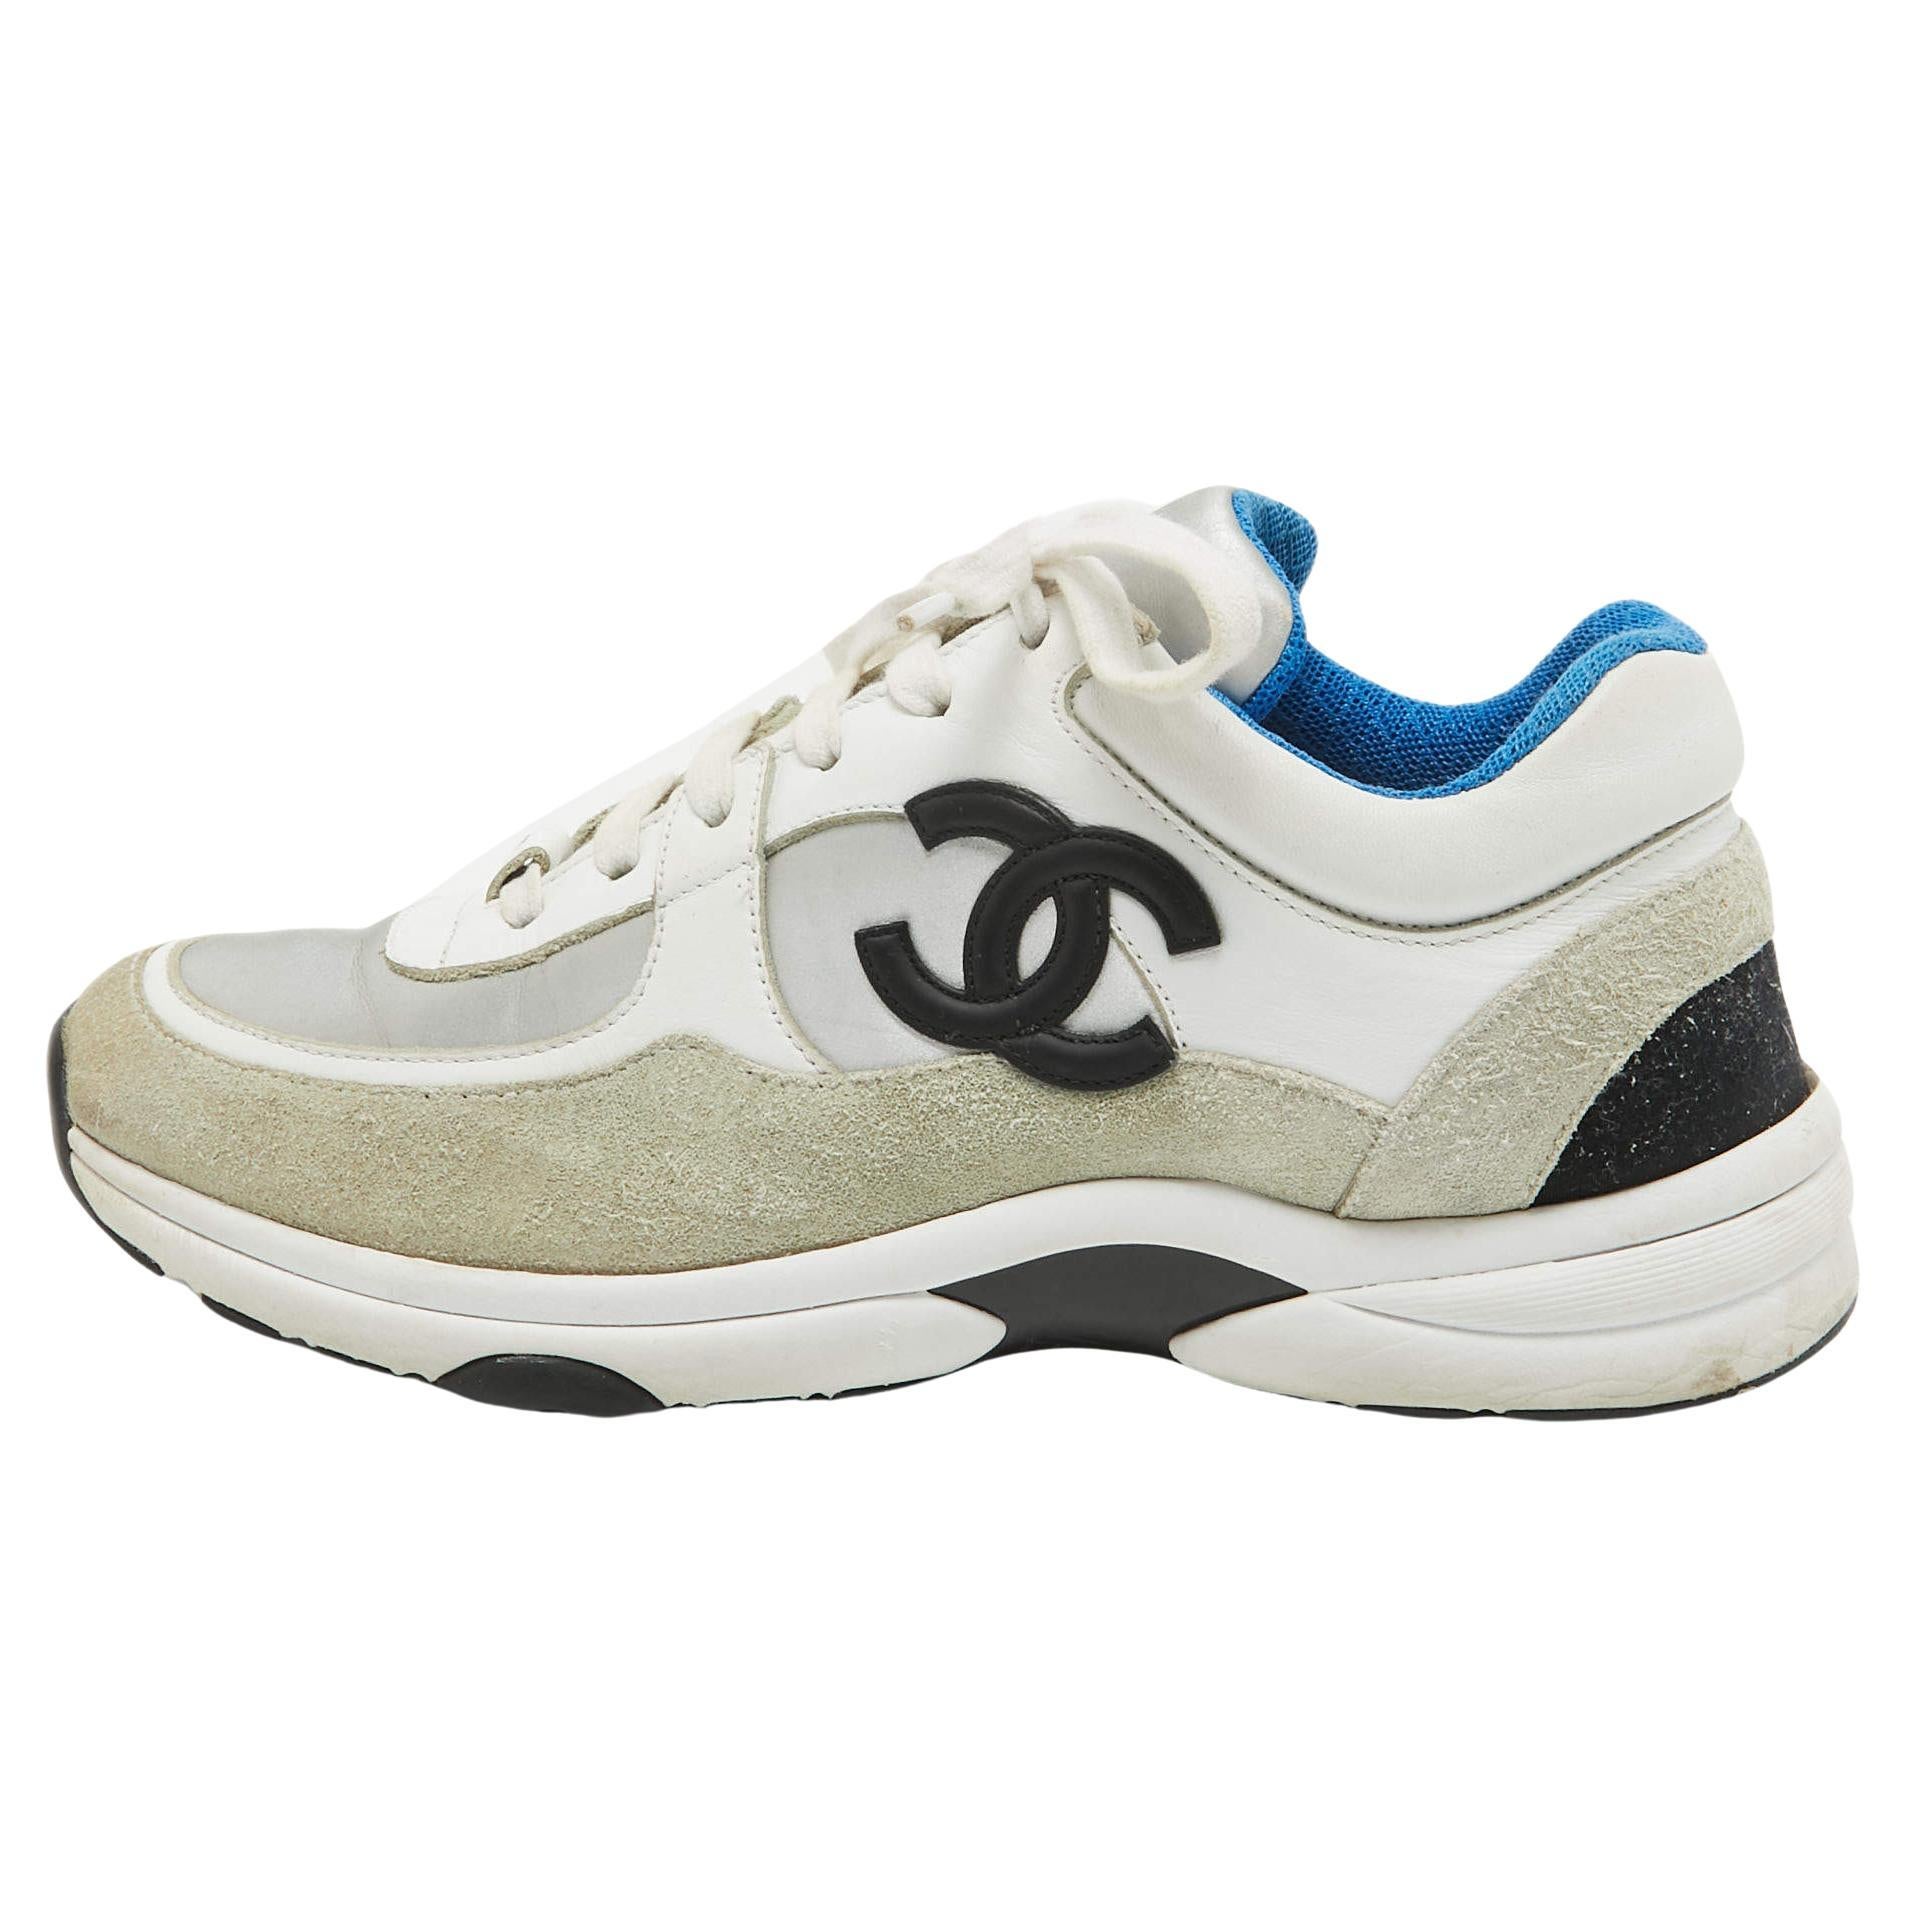 Chanel Multicolor Leather and Suede CC Logo Low Top Sneakers Size 38.5